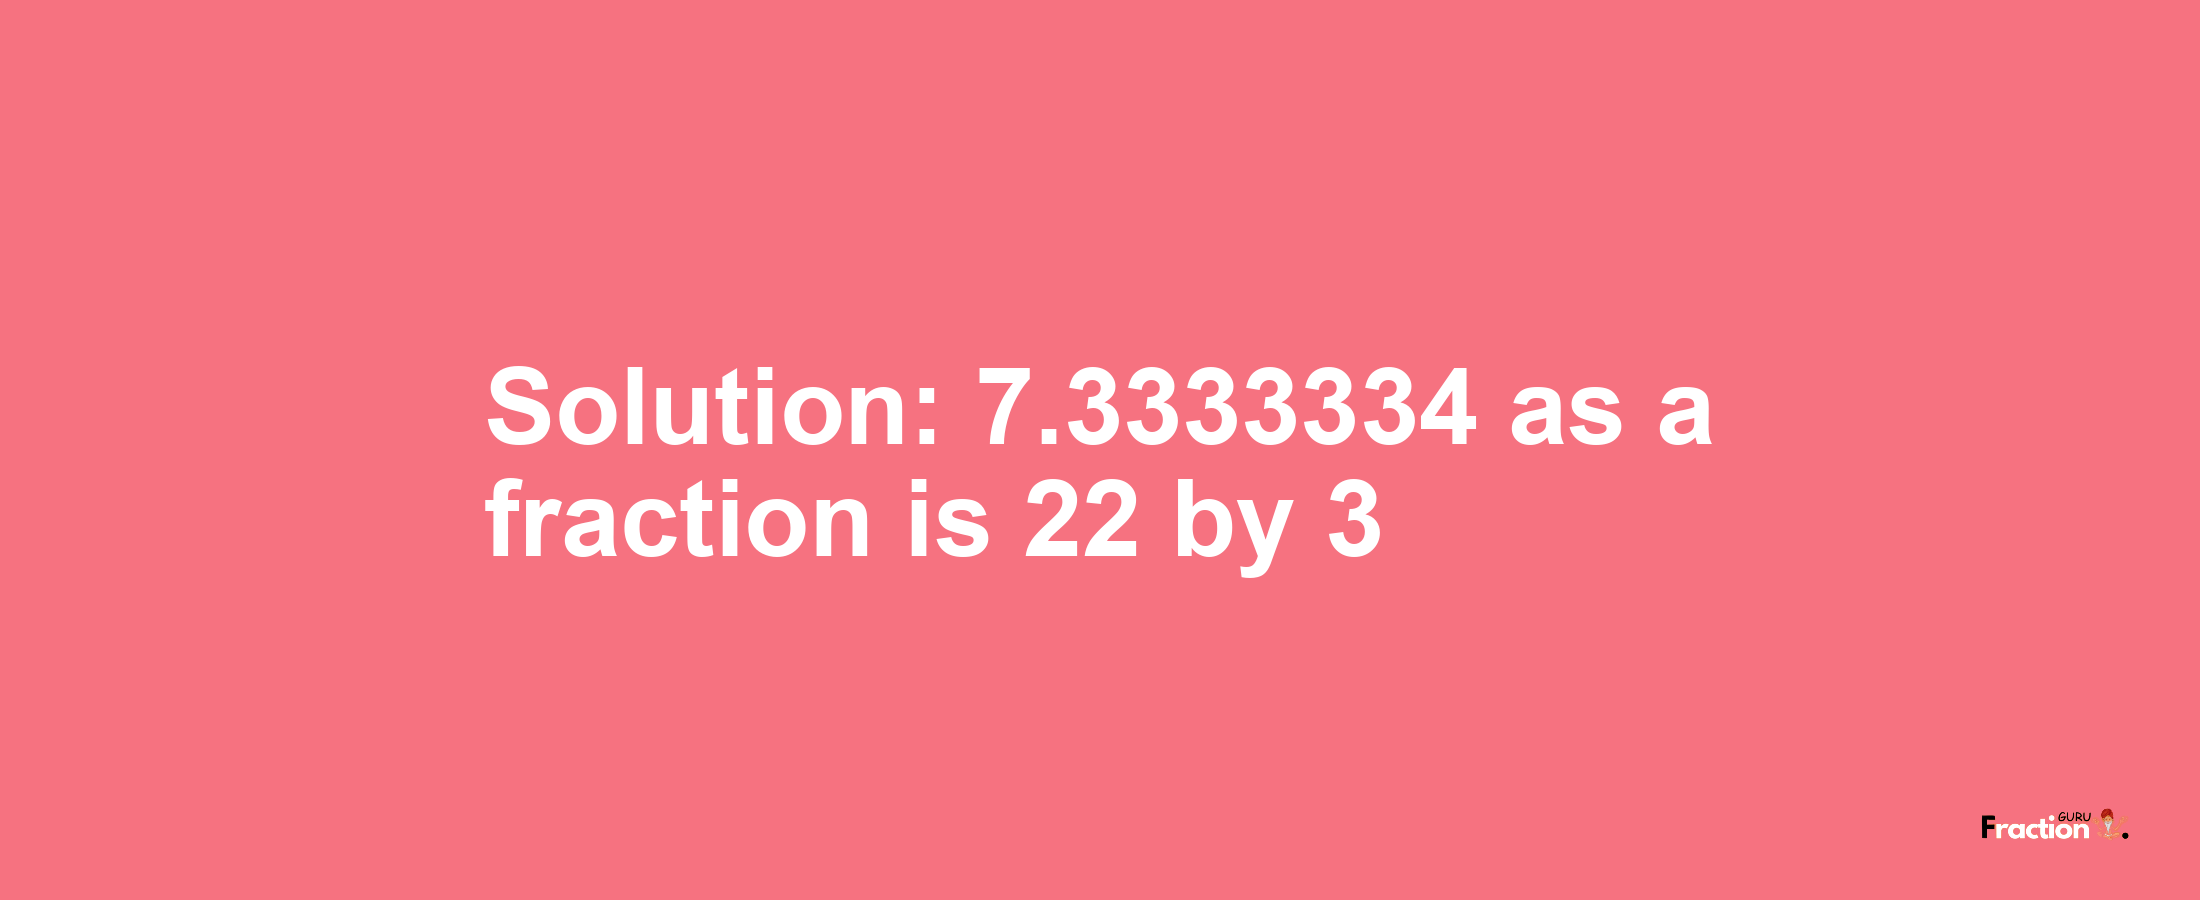 Solution:7.3333334 as a fraction is 22/3